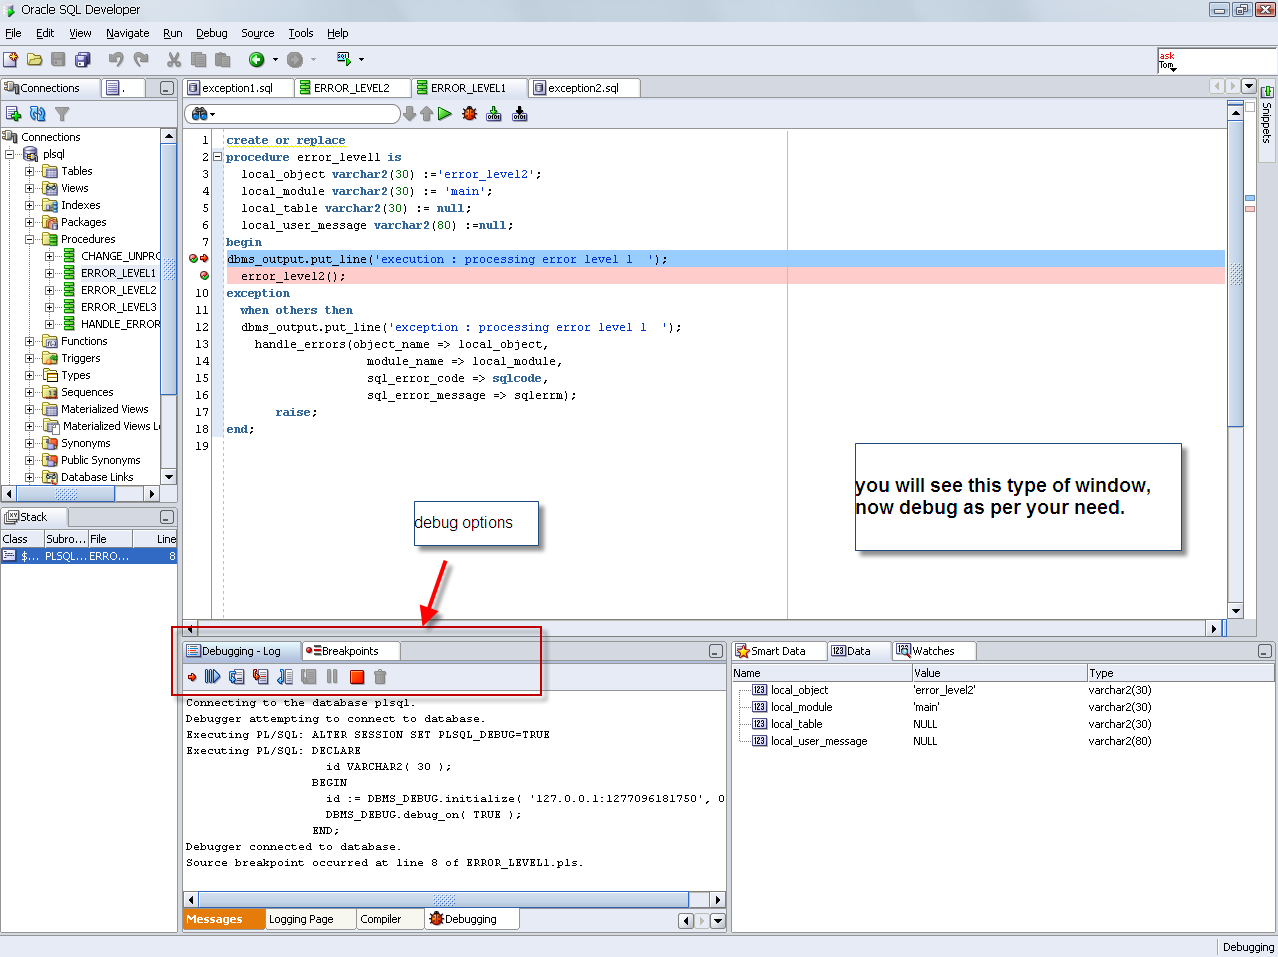 how to run stored proc in oracle sql developer tool